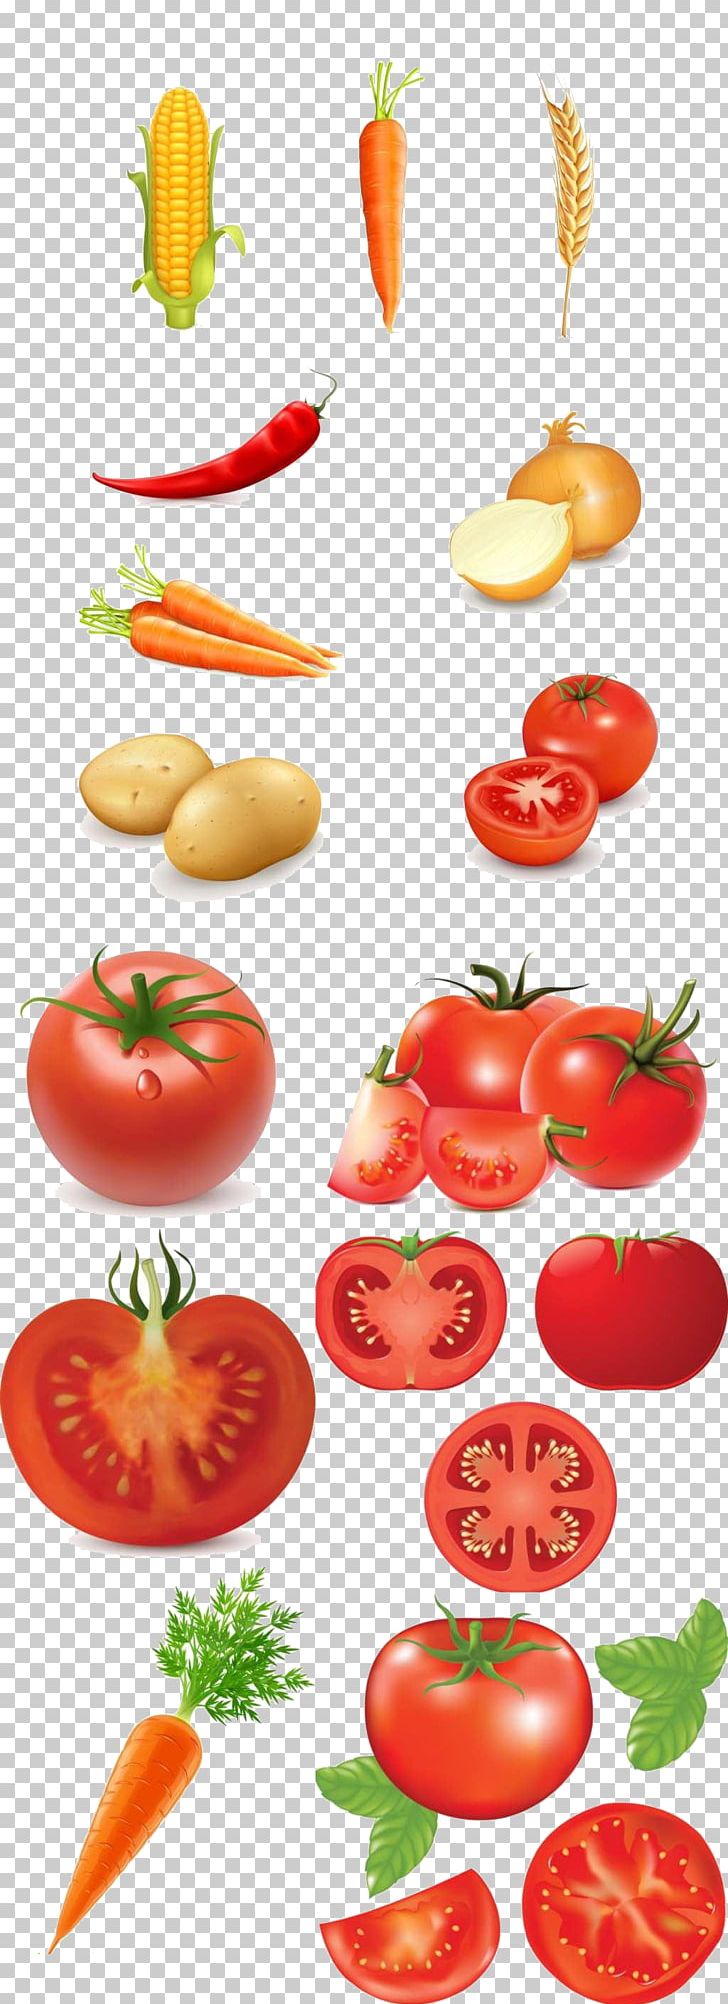 Cherry Tomato Stir-fried Tomato And Scrambled Eggs Vegetable Food PNG, Clipart, All Types, Cabbage, Corn, Design Element, Eating Free PNG Download